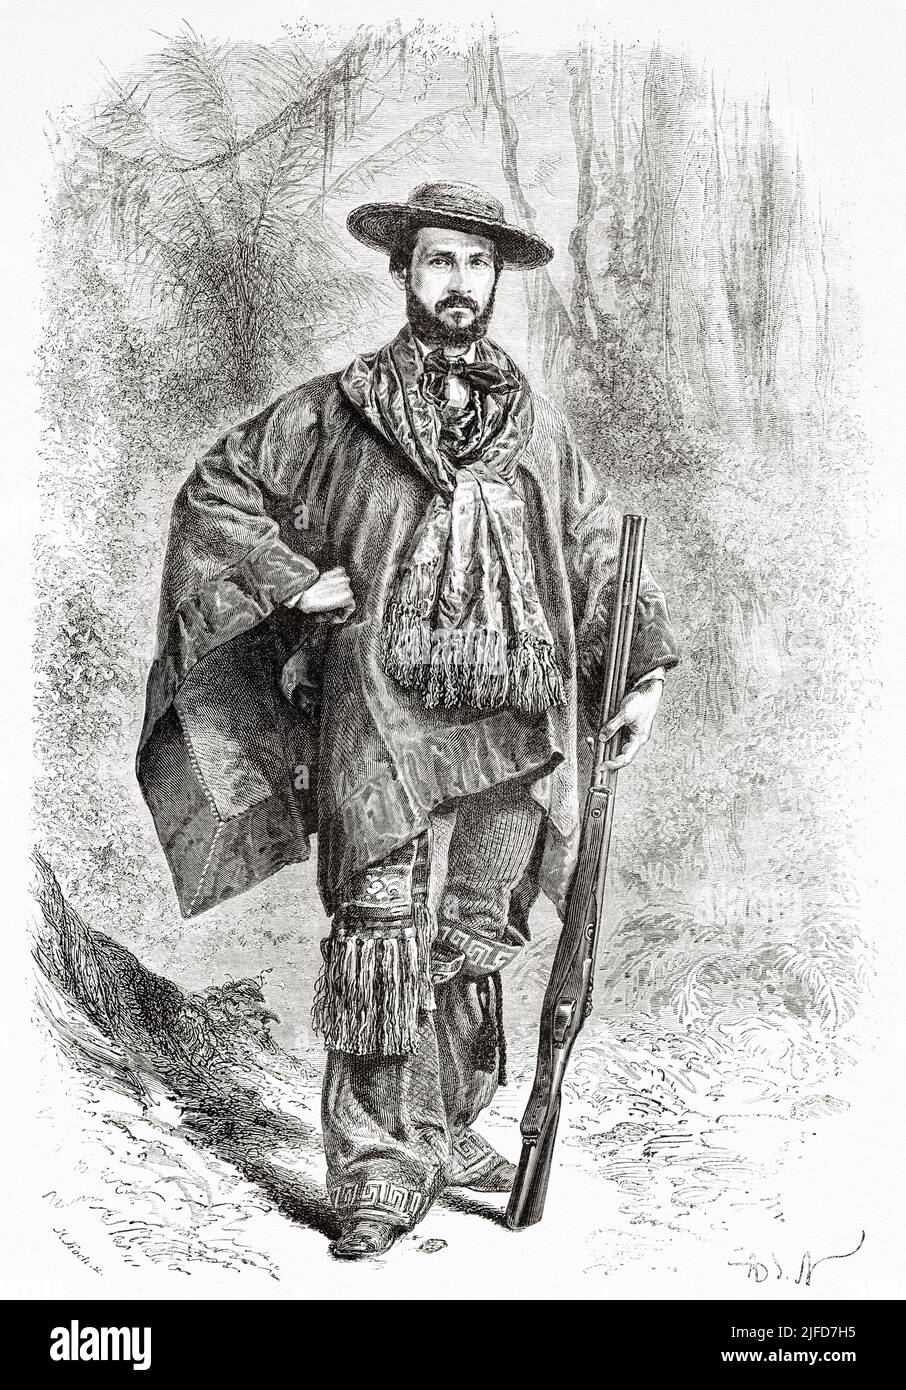 Portrait of Paul Marcoy. Laurent Saint-Cricq (1815-1887) 19th century French naturalist and explorer. Brazil. South America. Journey through South America, from the Pacific Ocean to the Atlantic Ocean by Paul Marcoy 1848-1860 from Le Tour du Monde 1867 Stock Photo